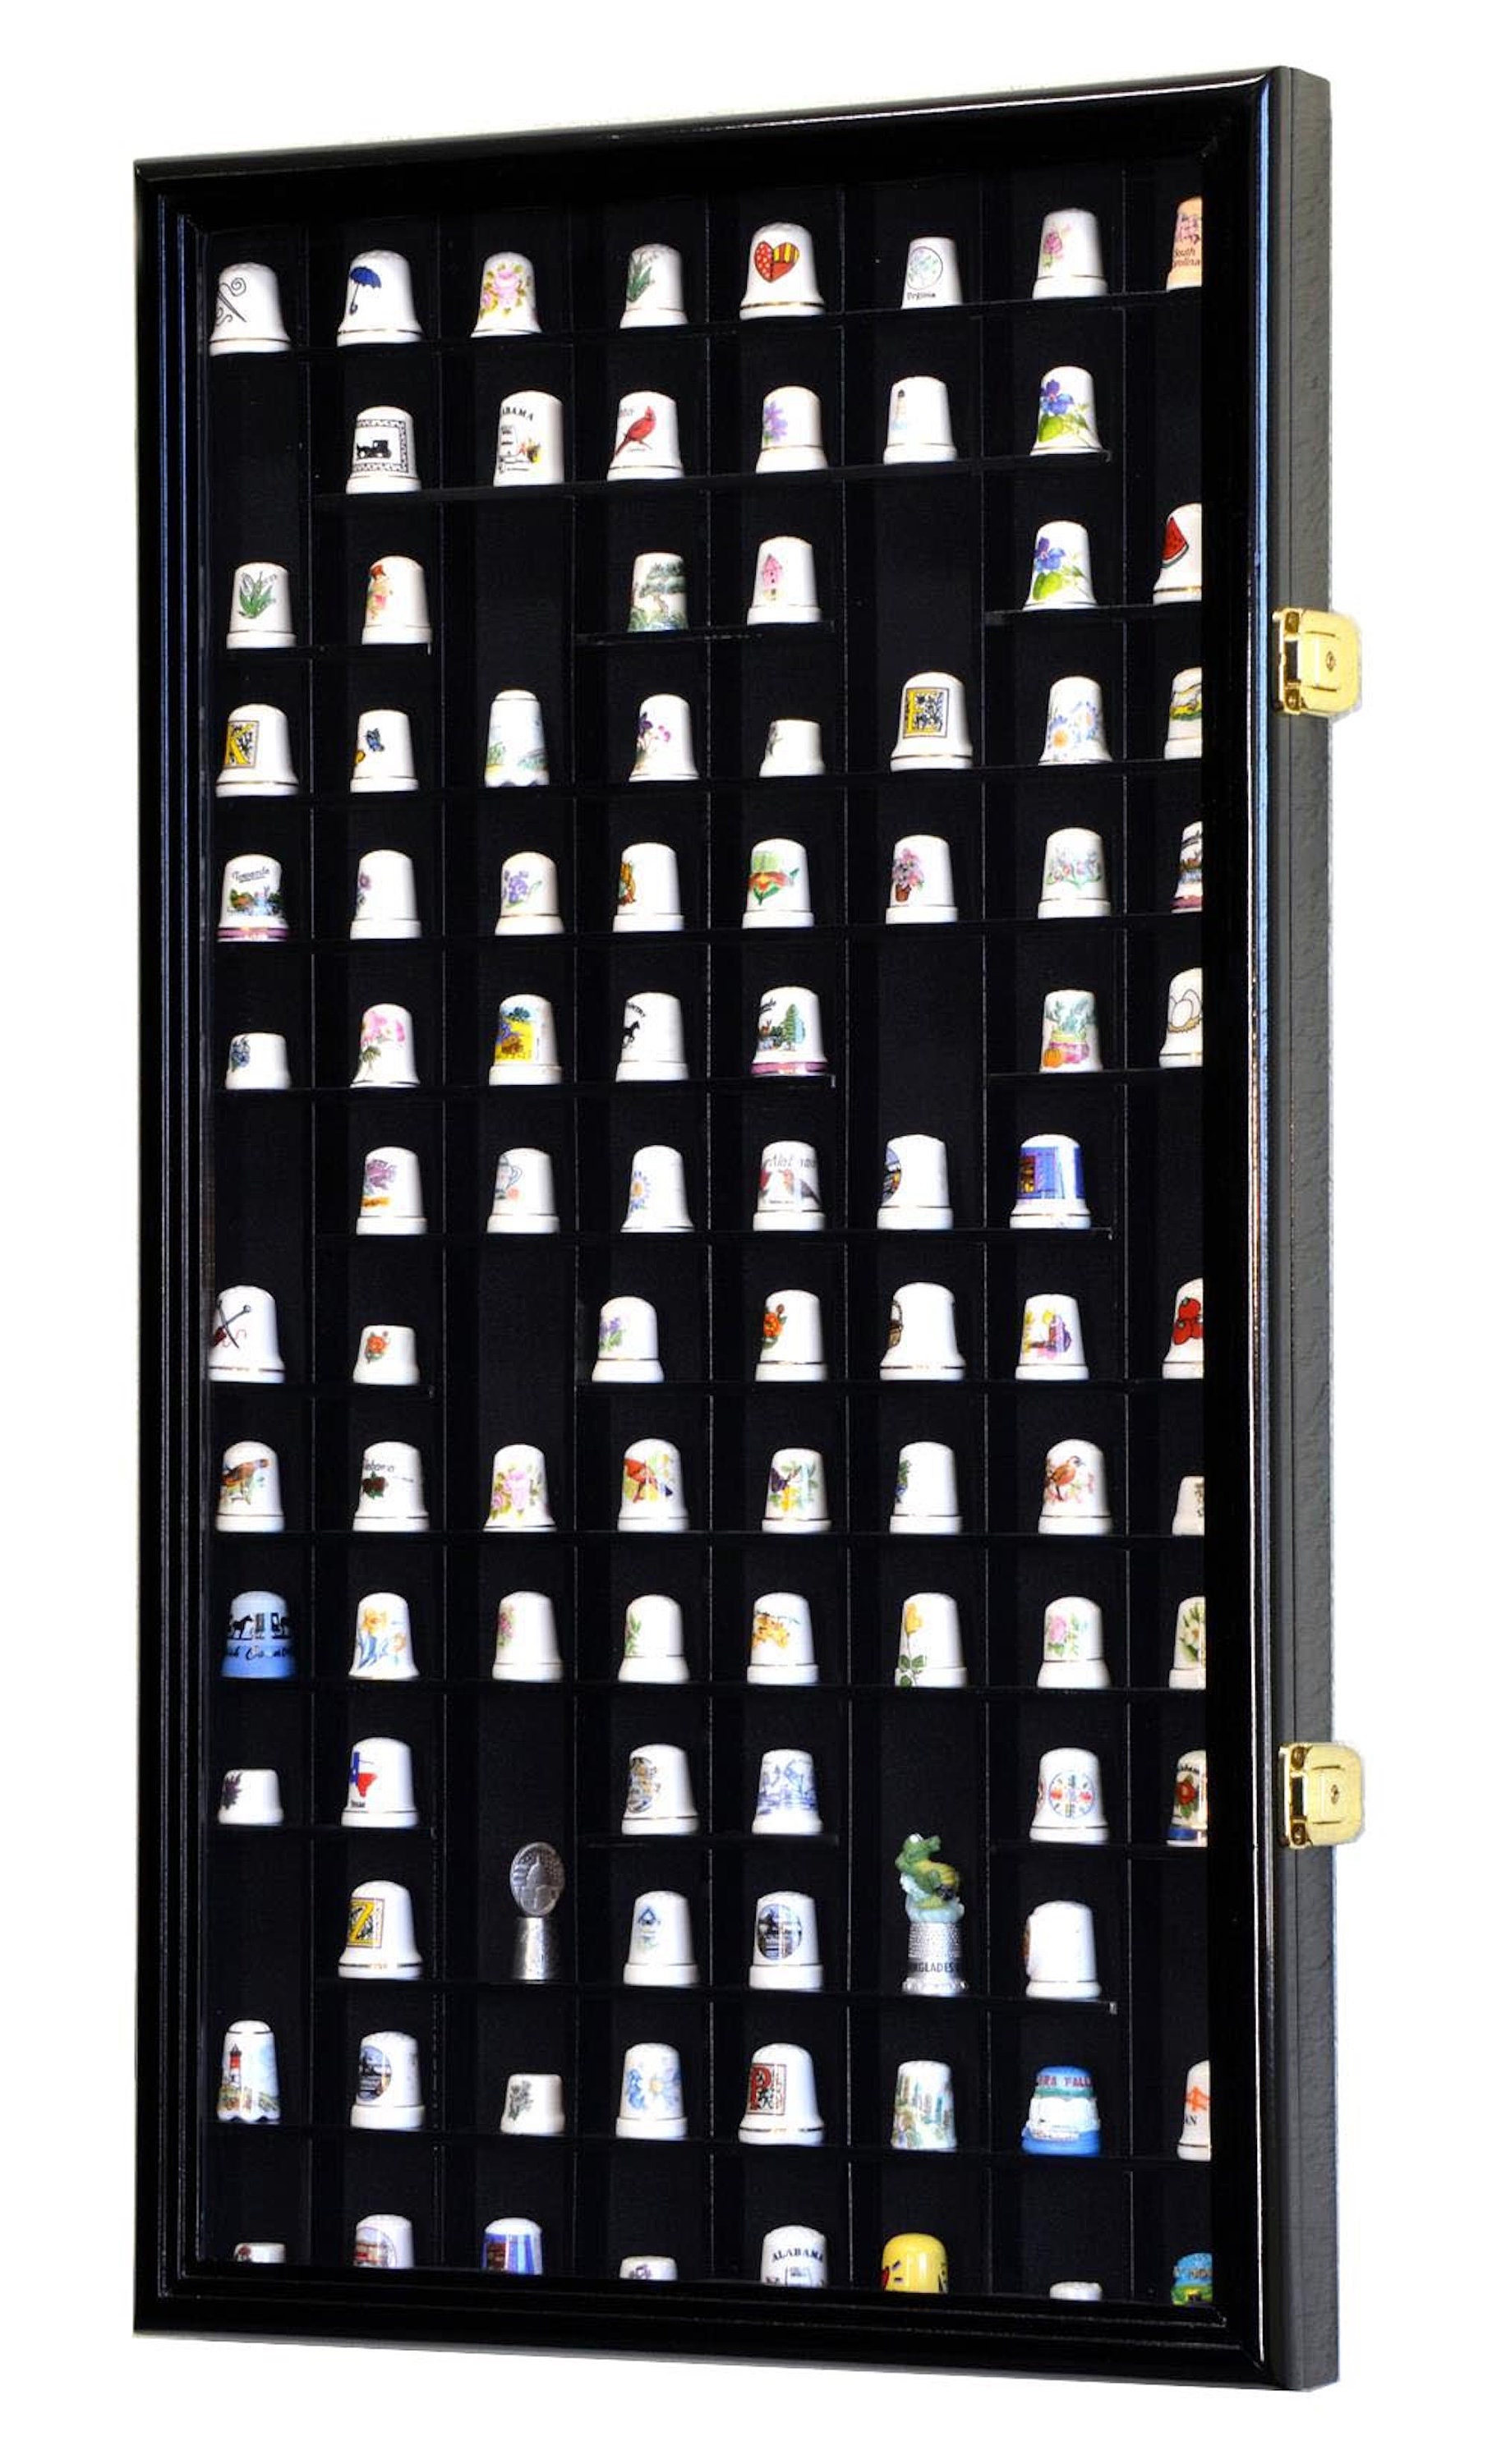 Thimble display cases… who knew?? #trinkets #anotherboxformytrinkets #